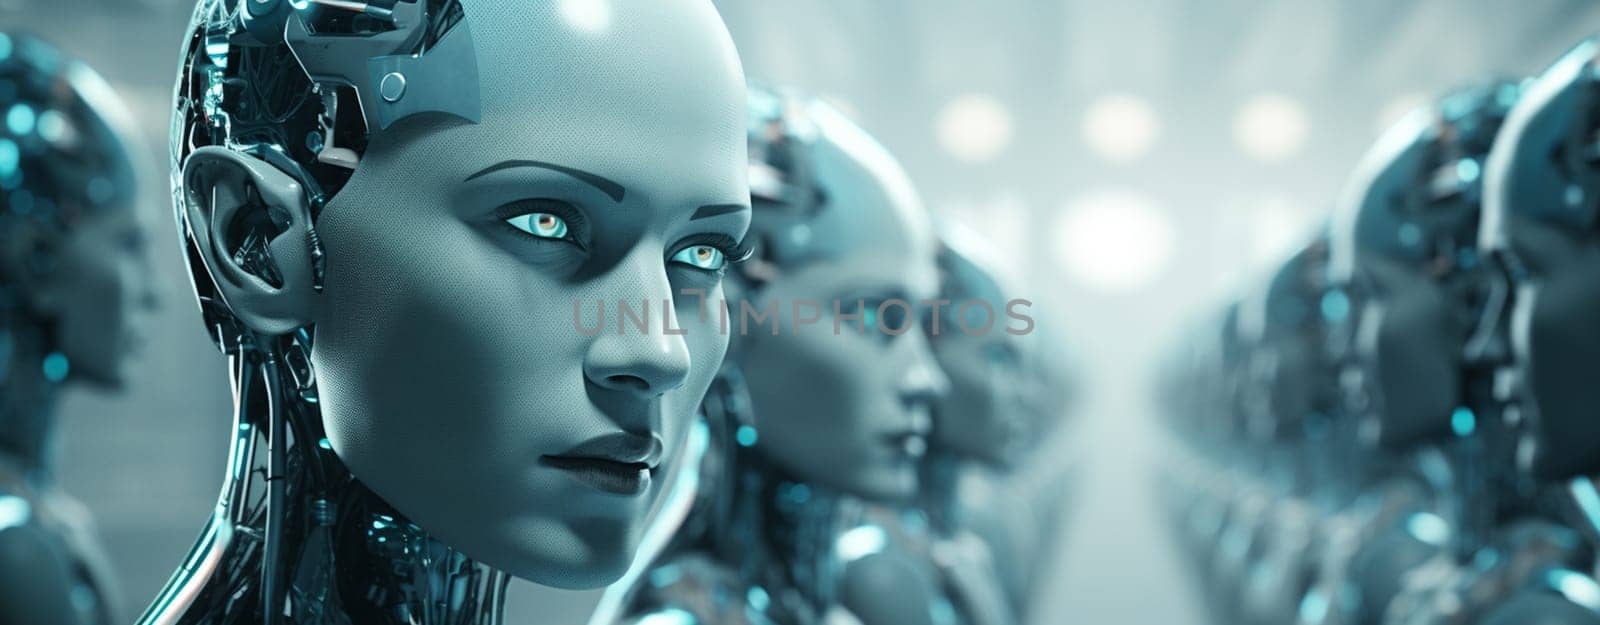 Leadership concept with 3d rendering female cyborg or robot arm crossed with robot army.